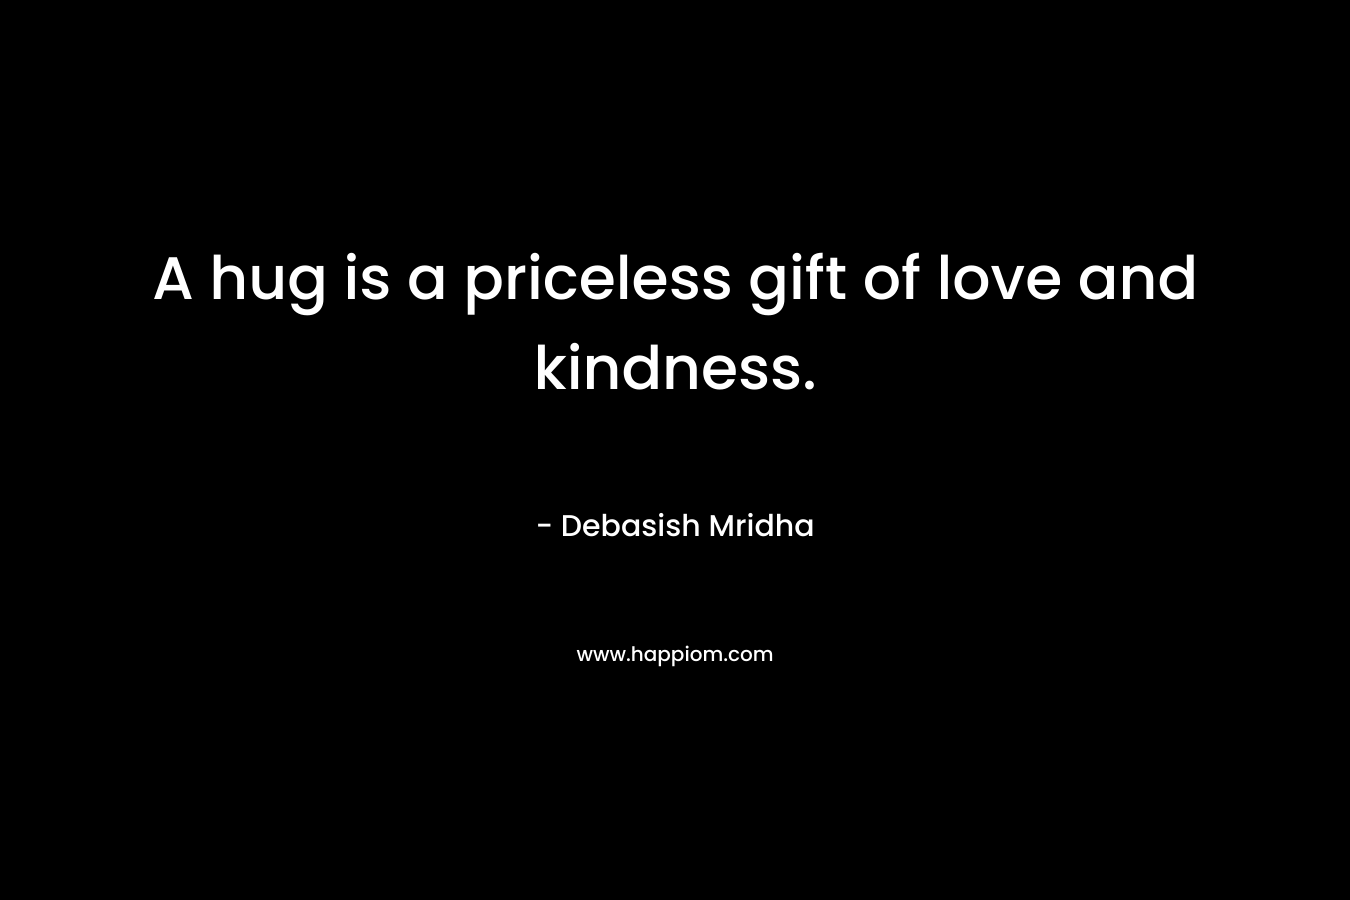 A hug is a priceless gift of love and kindness.